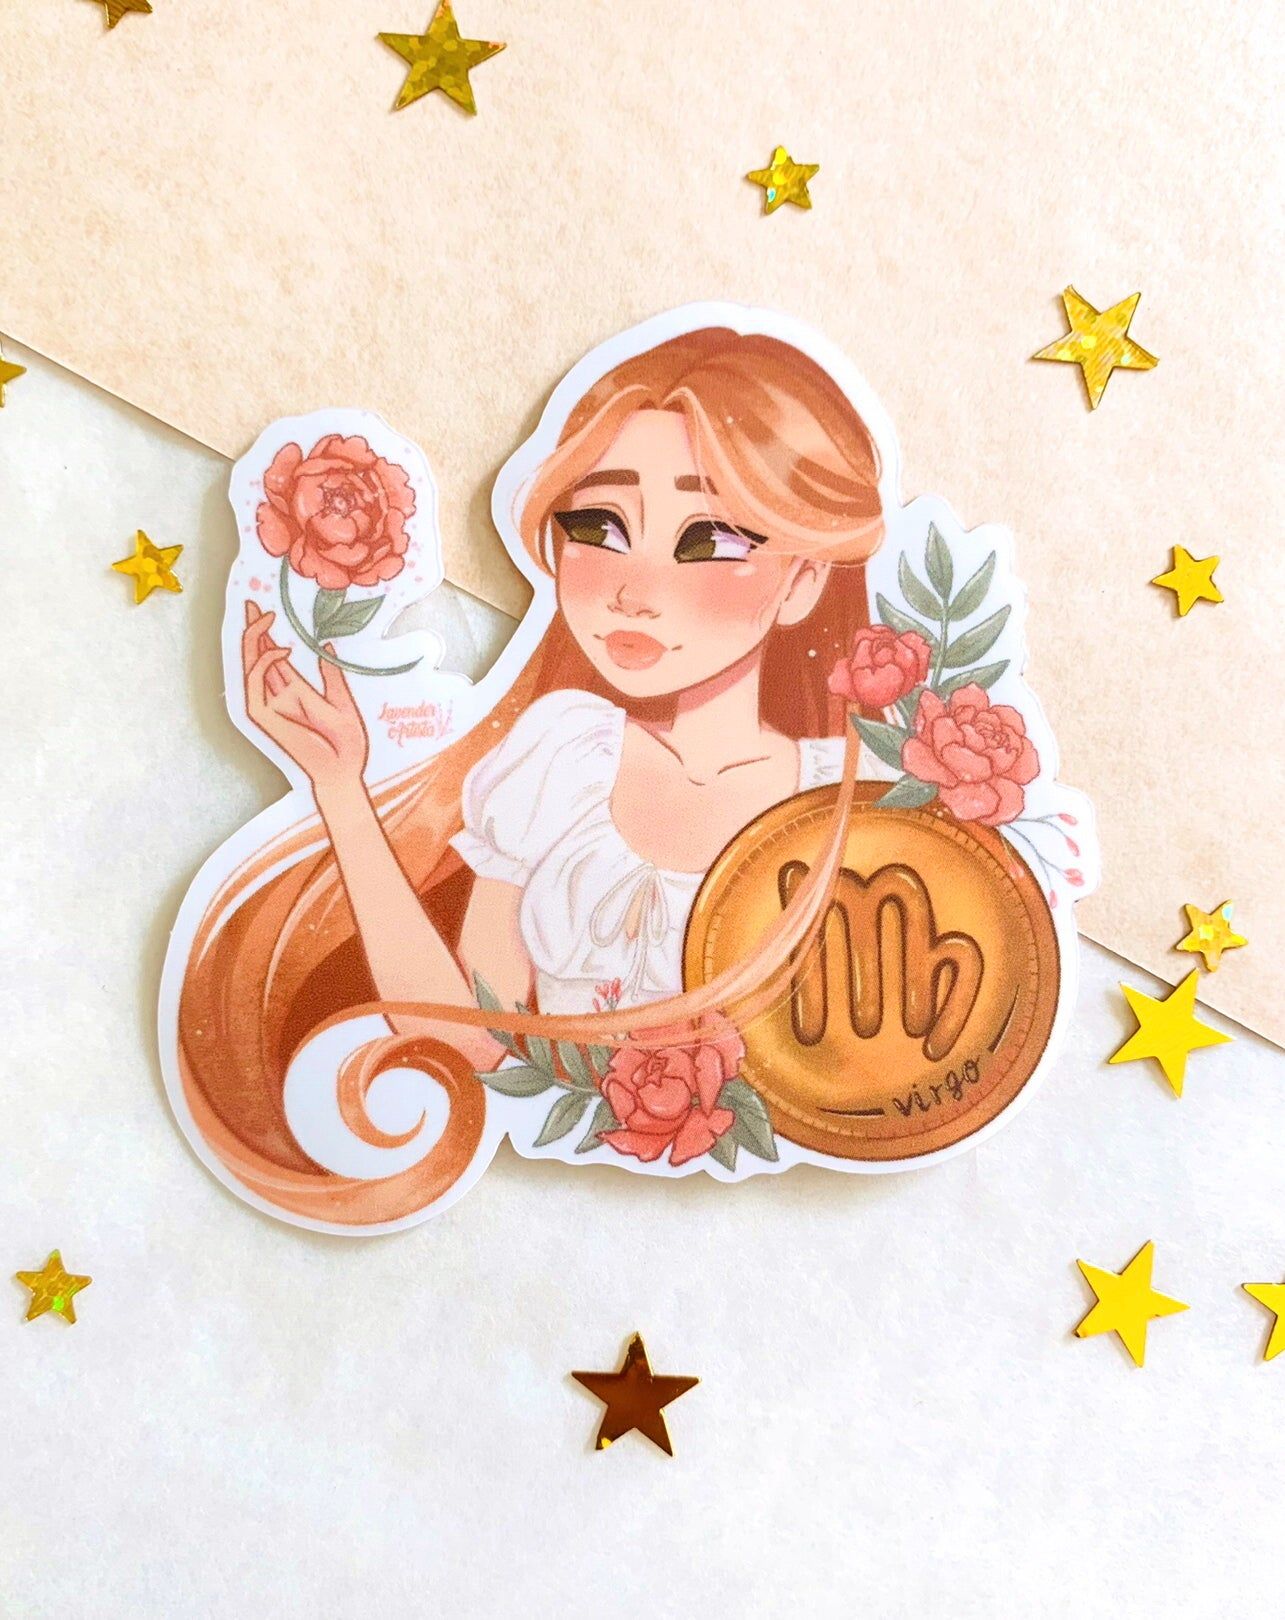 A sticker of a digital illustration of a girl with long red hair holding a coin with the astrological sign of Virgo on it. - Virgo, Rapunzel